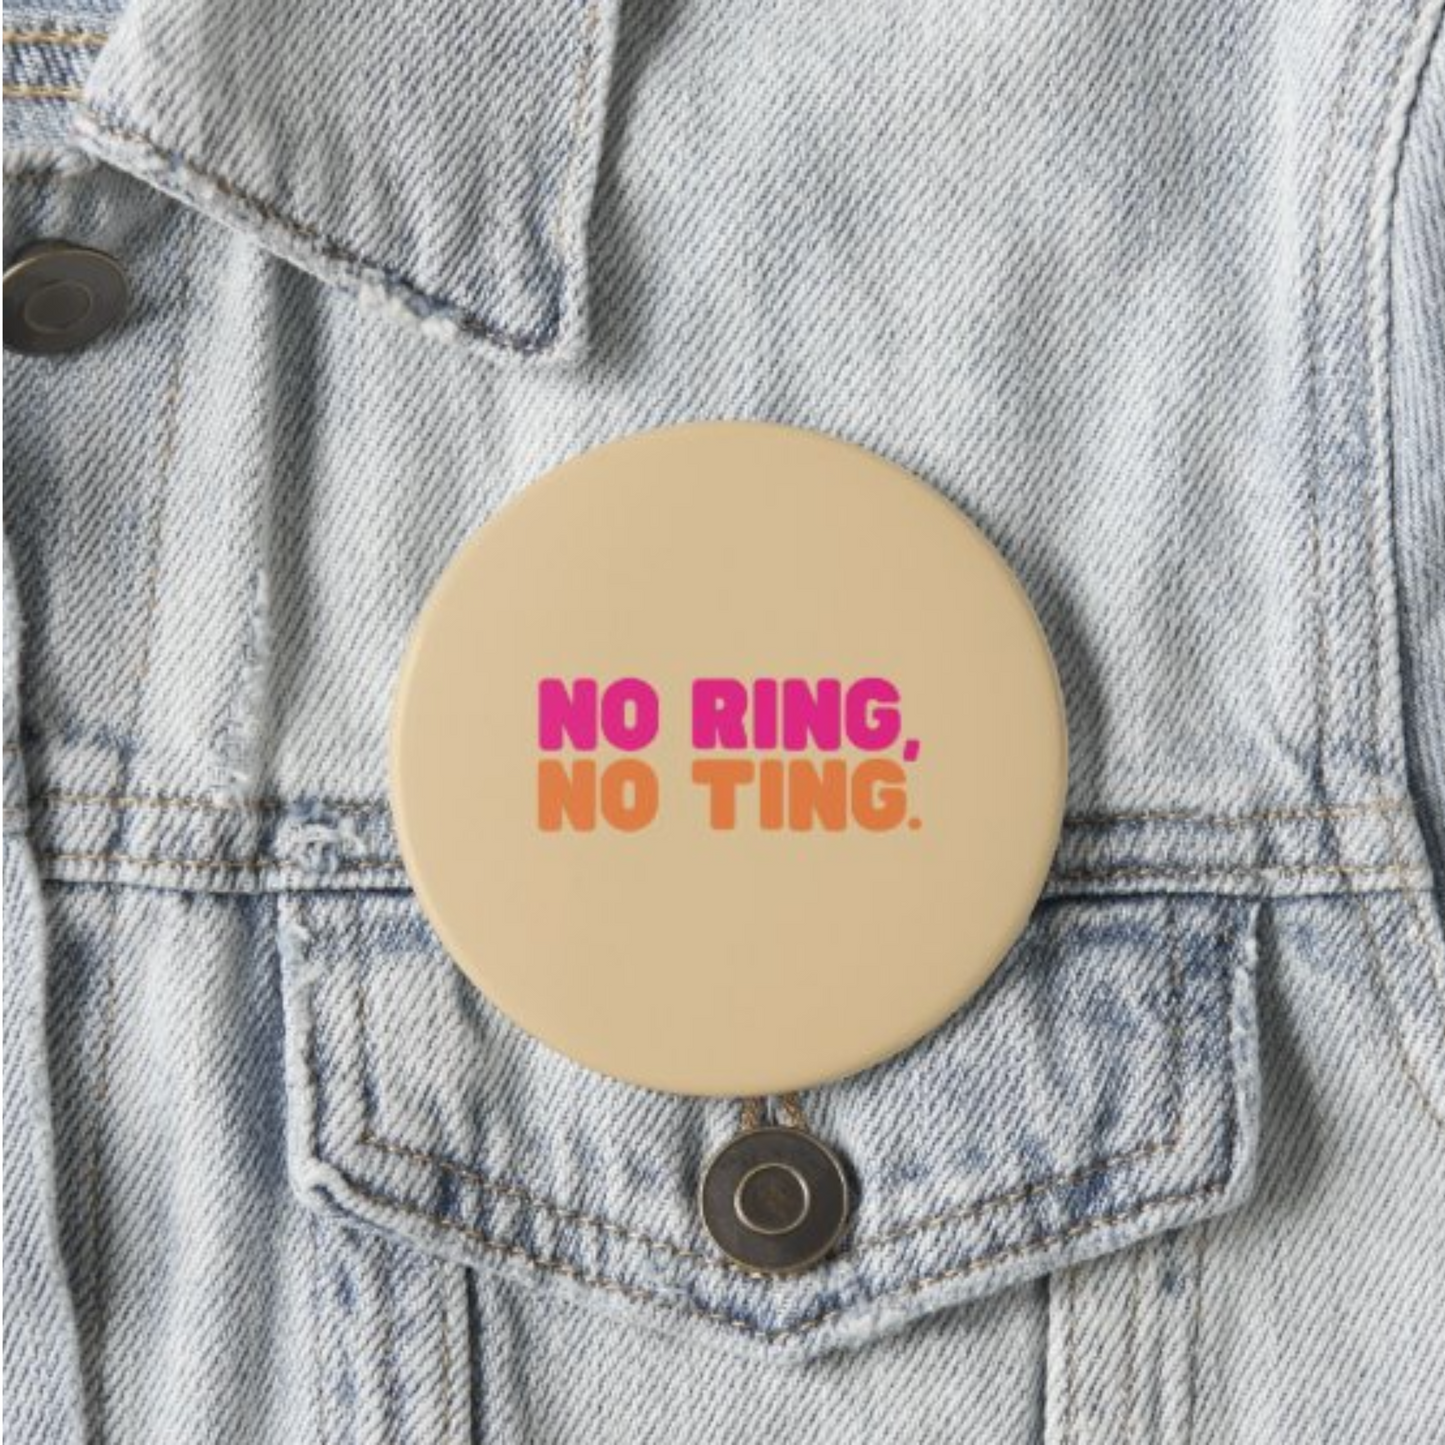 NO RING BUTTON